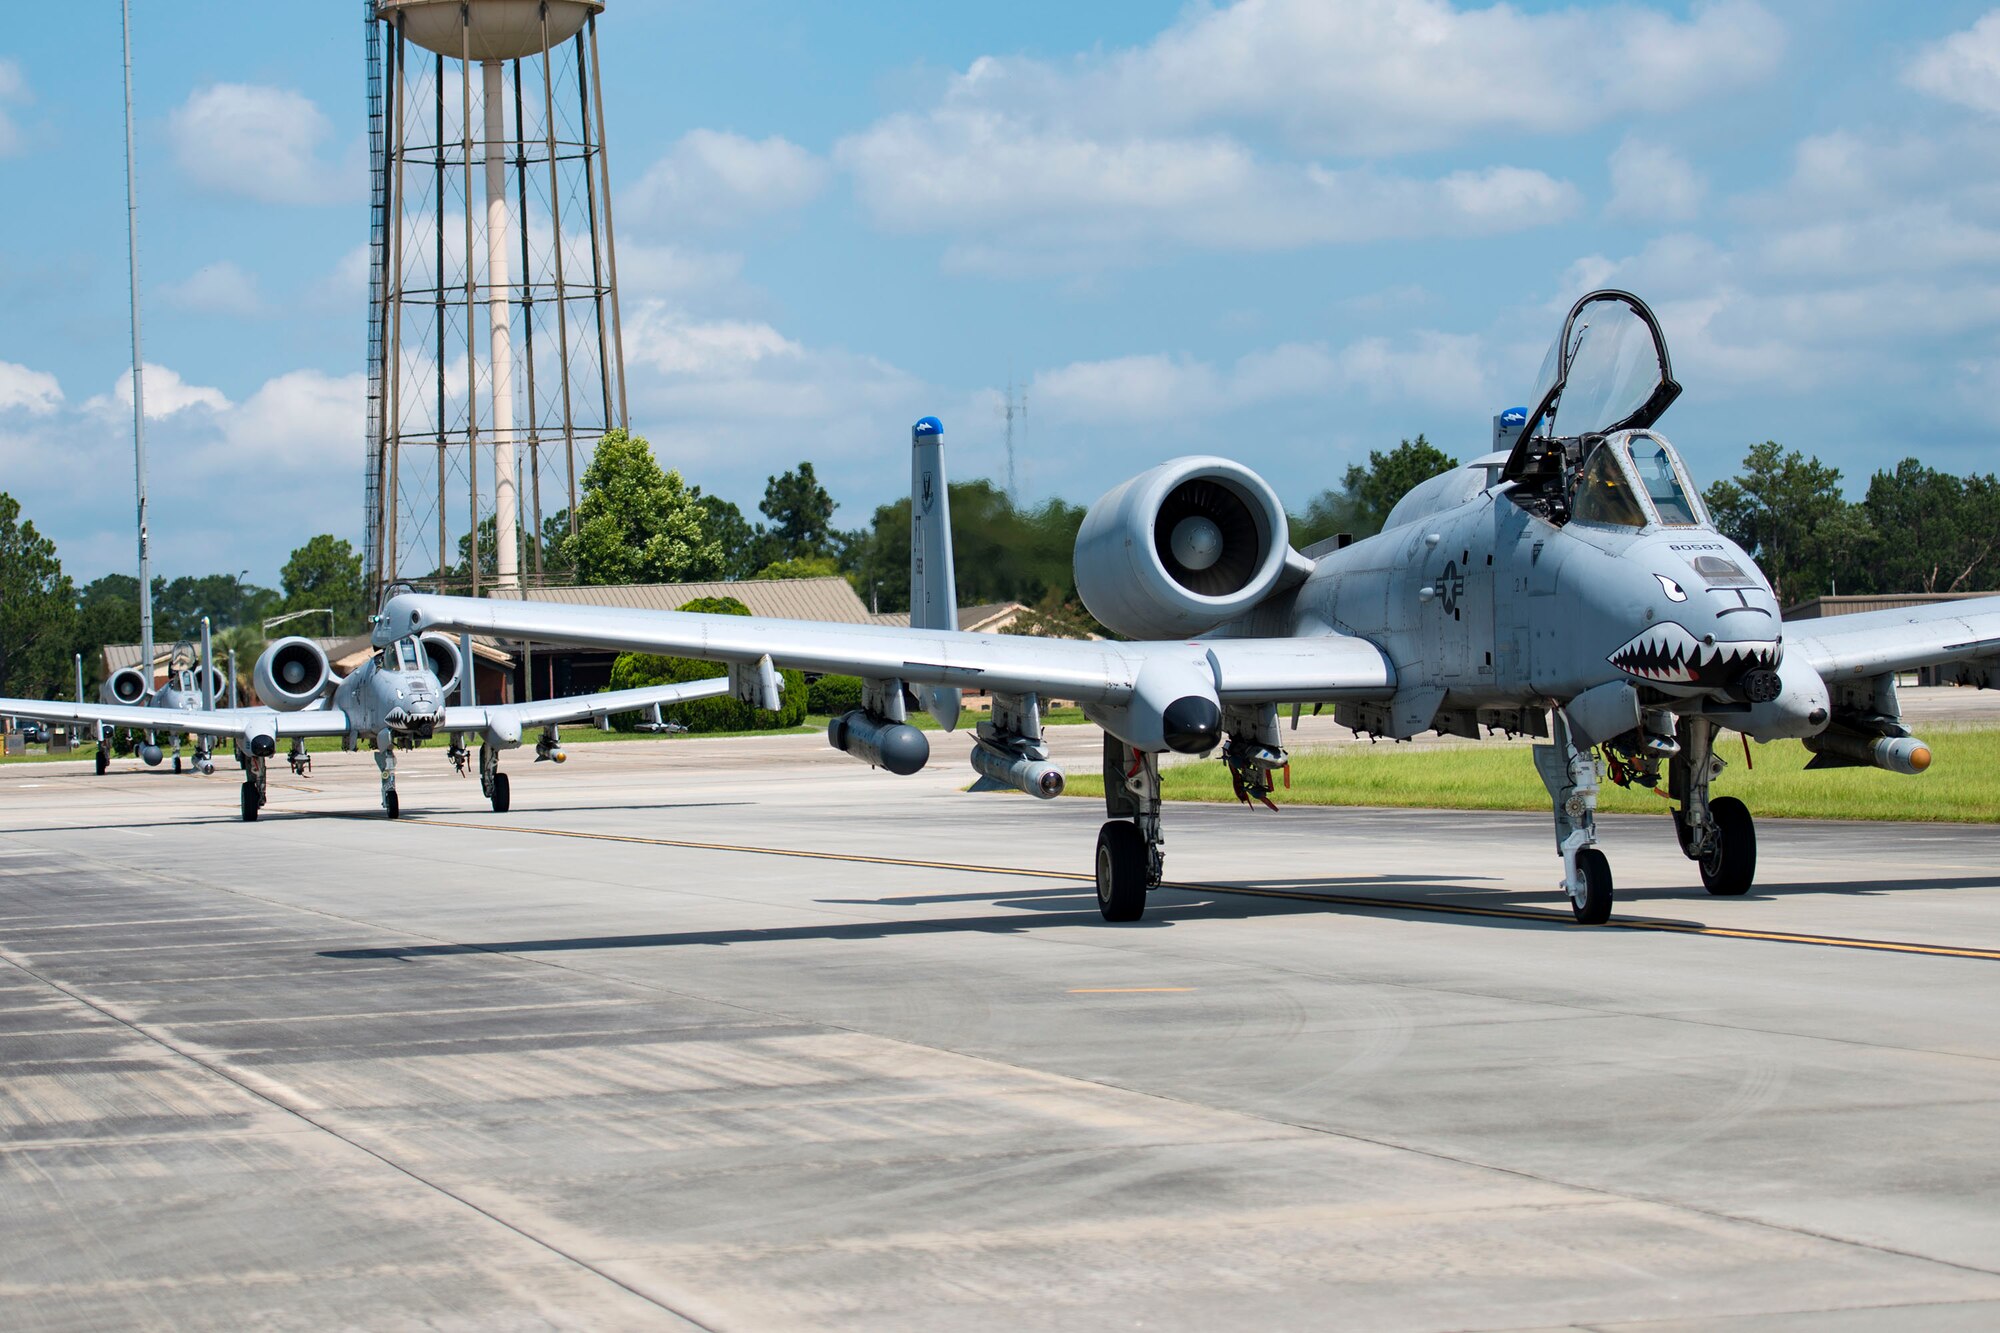 A-10C Thunderbolt IIs taxi on the runway toward a hot-pit refueling point, Aug. 14, 2018, at Moody Air Force Base, Ga. Members of the 23d Logistics Readiness Squadron preposition fueling trucks to allow aircraft to refuel without needing to shut down. This style of refueling is used to eliminate the need for additional maintenance procedures and to extend pilots’ training time per flight which improves operations tempo. (U.S. Air Force photo by Airman 1st Class Erick Requadt)